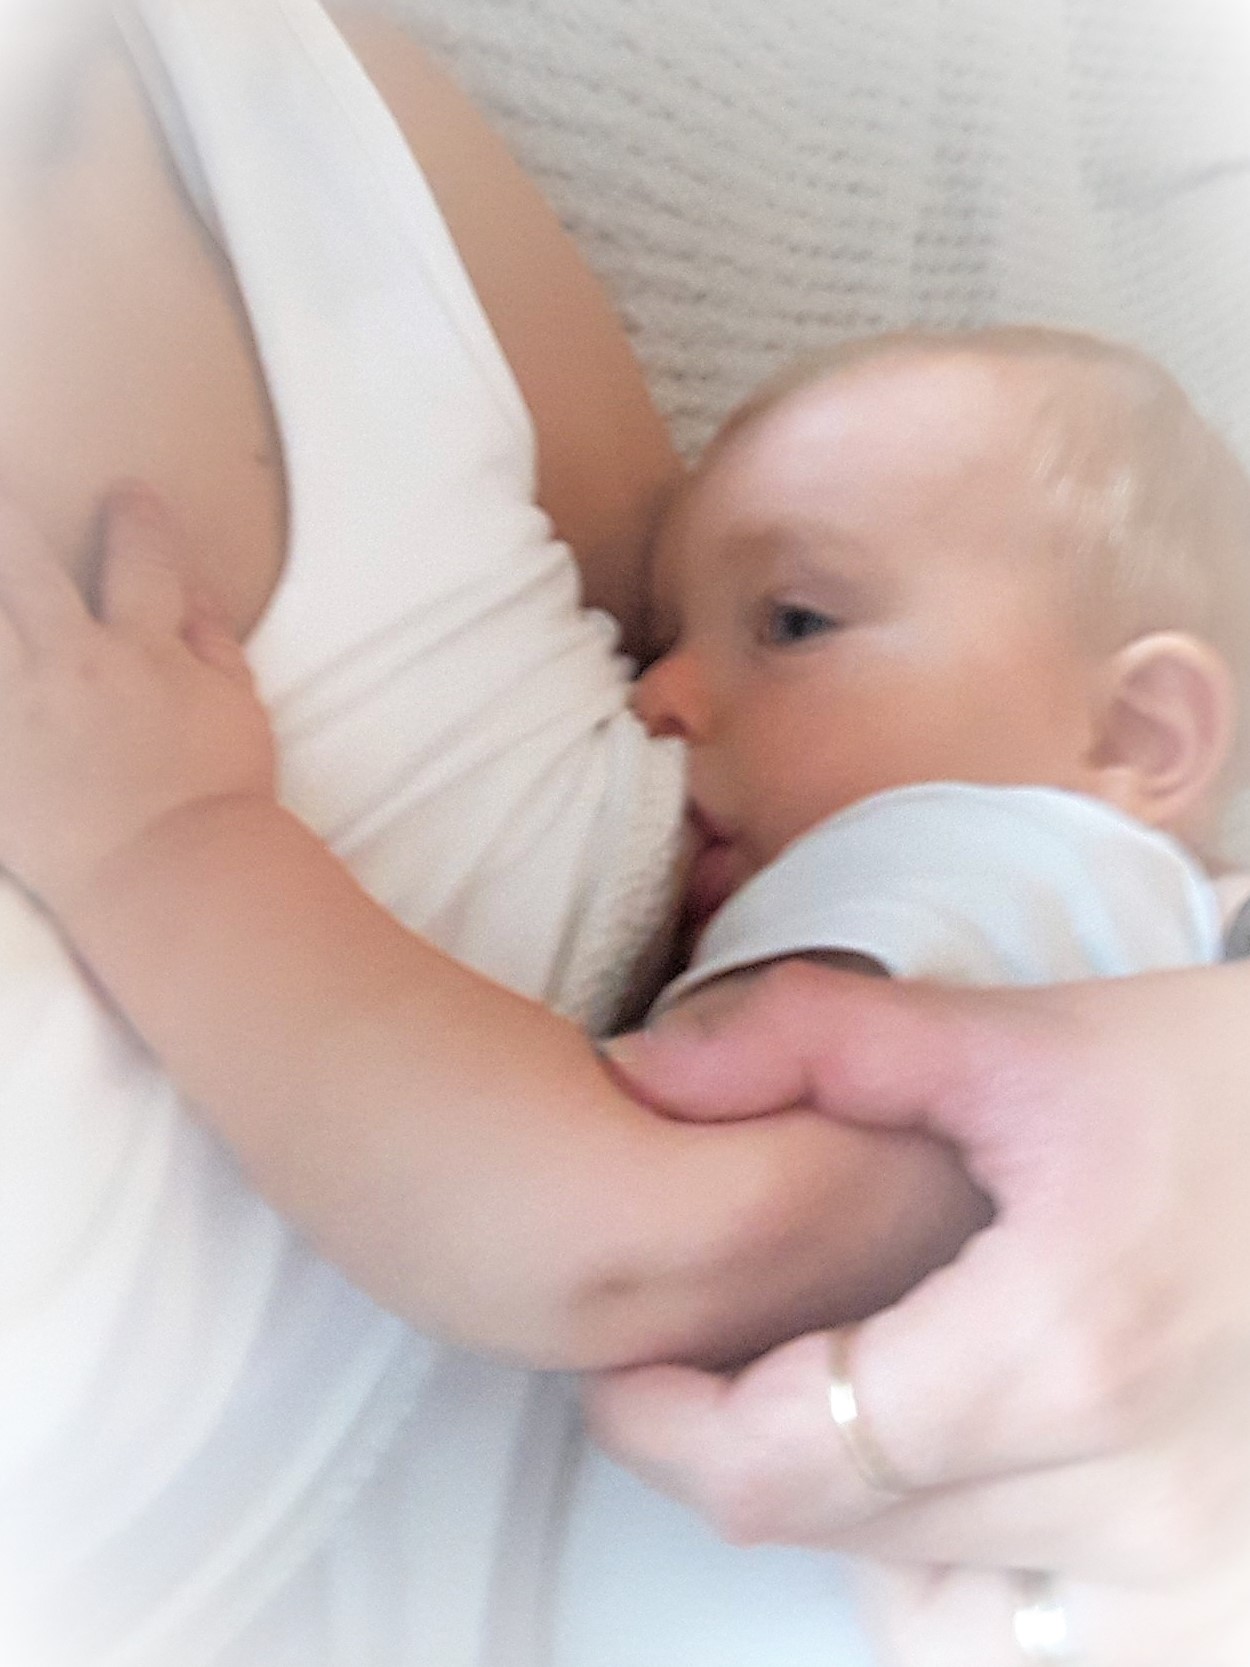 Breastfeed with confidence with The Bshirt – review